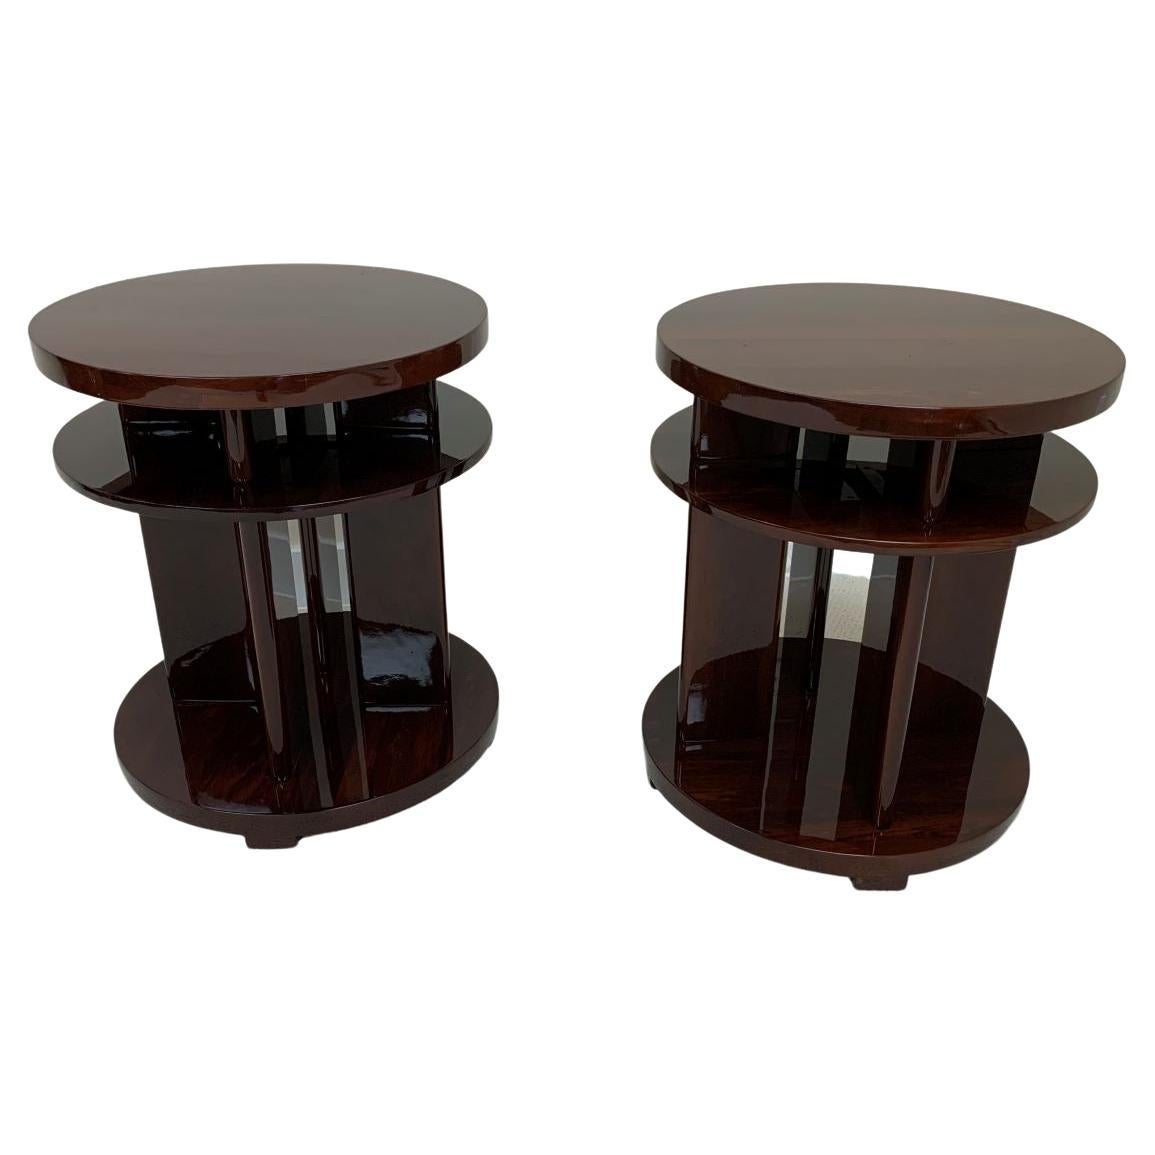 Elegant Art Deco side table reminiscent of the works by Donald Deskey or Gilbert Rohde. The table features three circular tiers connected by four streamline supports. A very versatile piece; perfect as an end, side or bedside table. Dimensions: 24